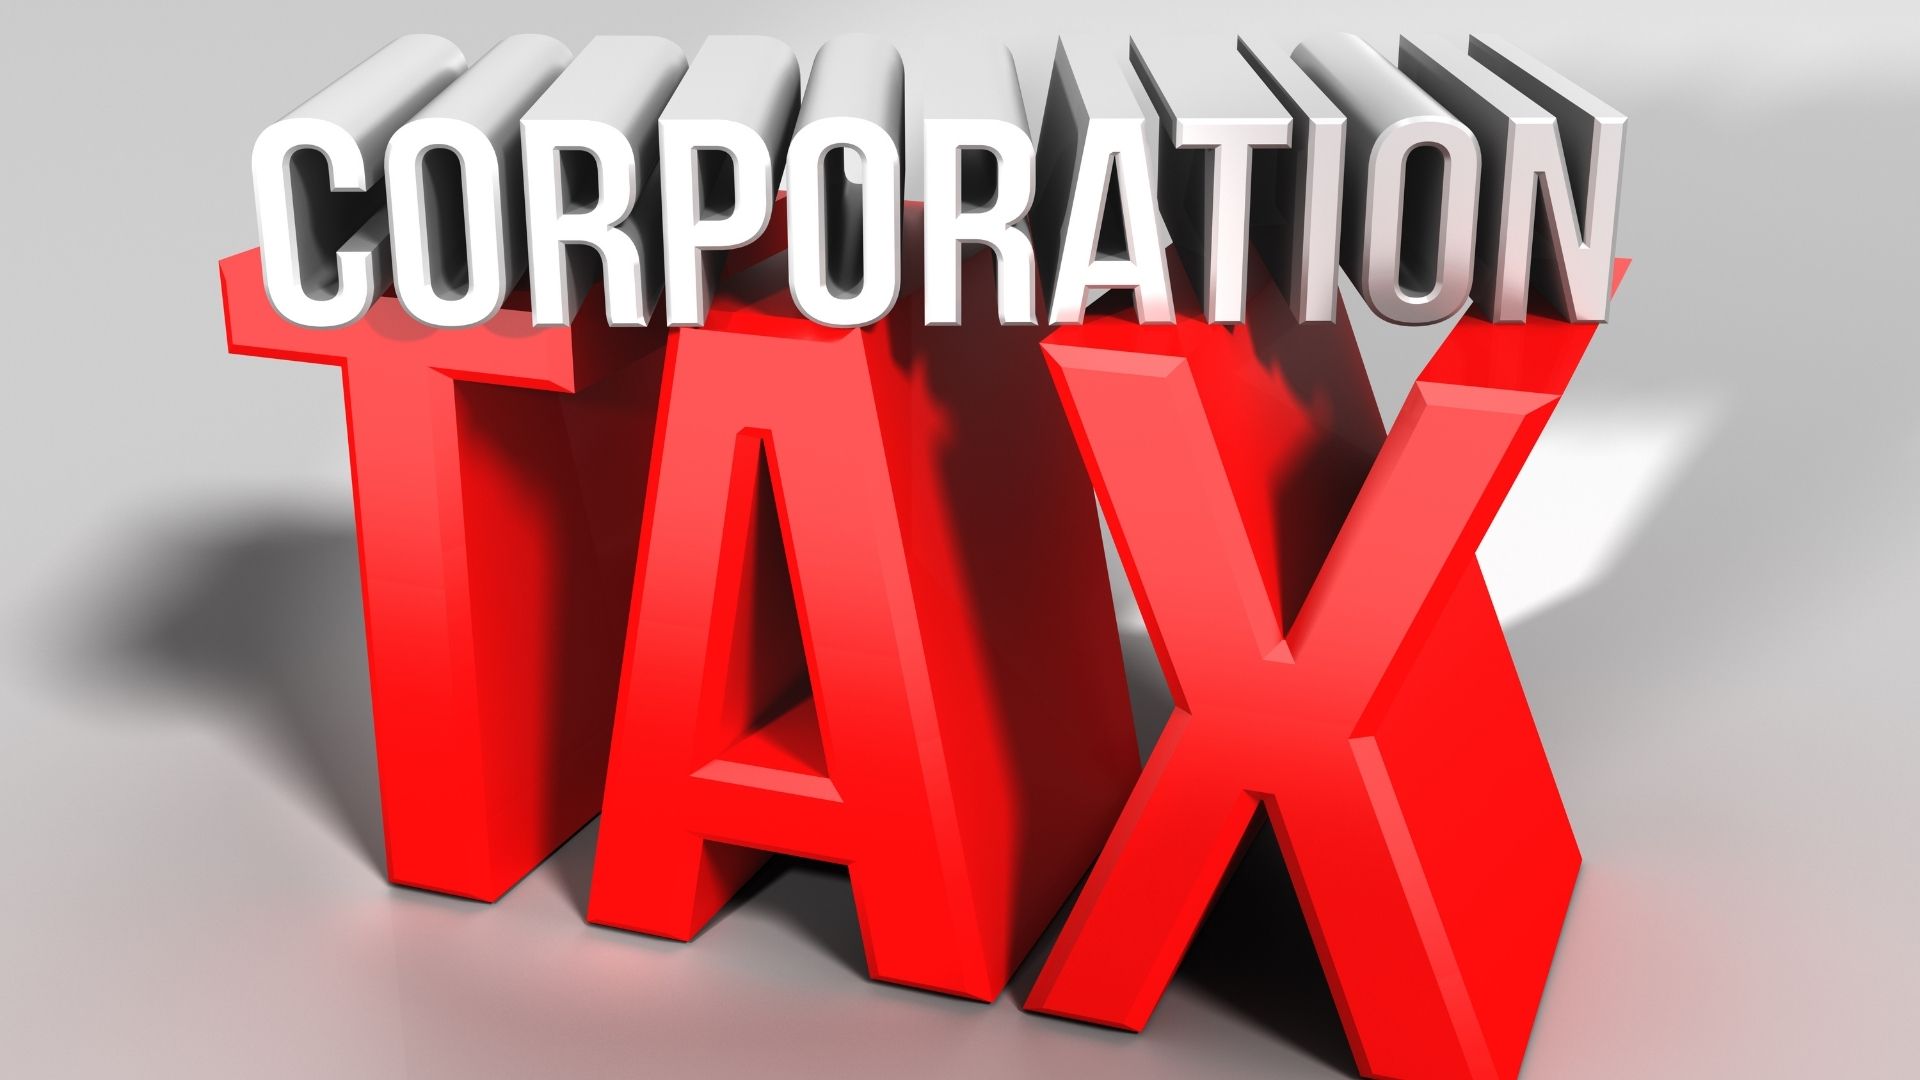 A Guide to Corporation Tax who will pay it